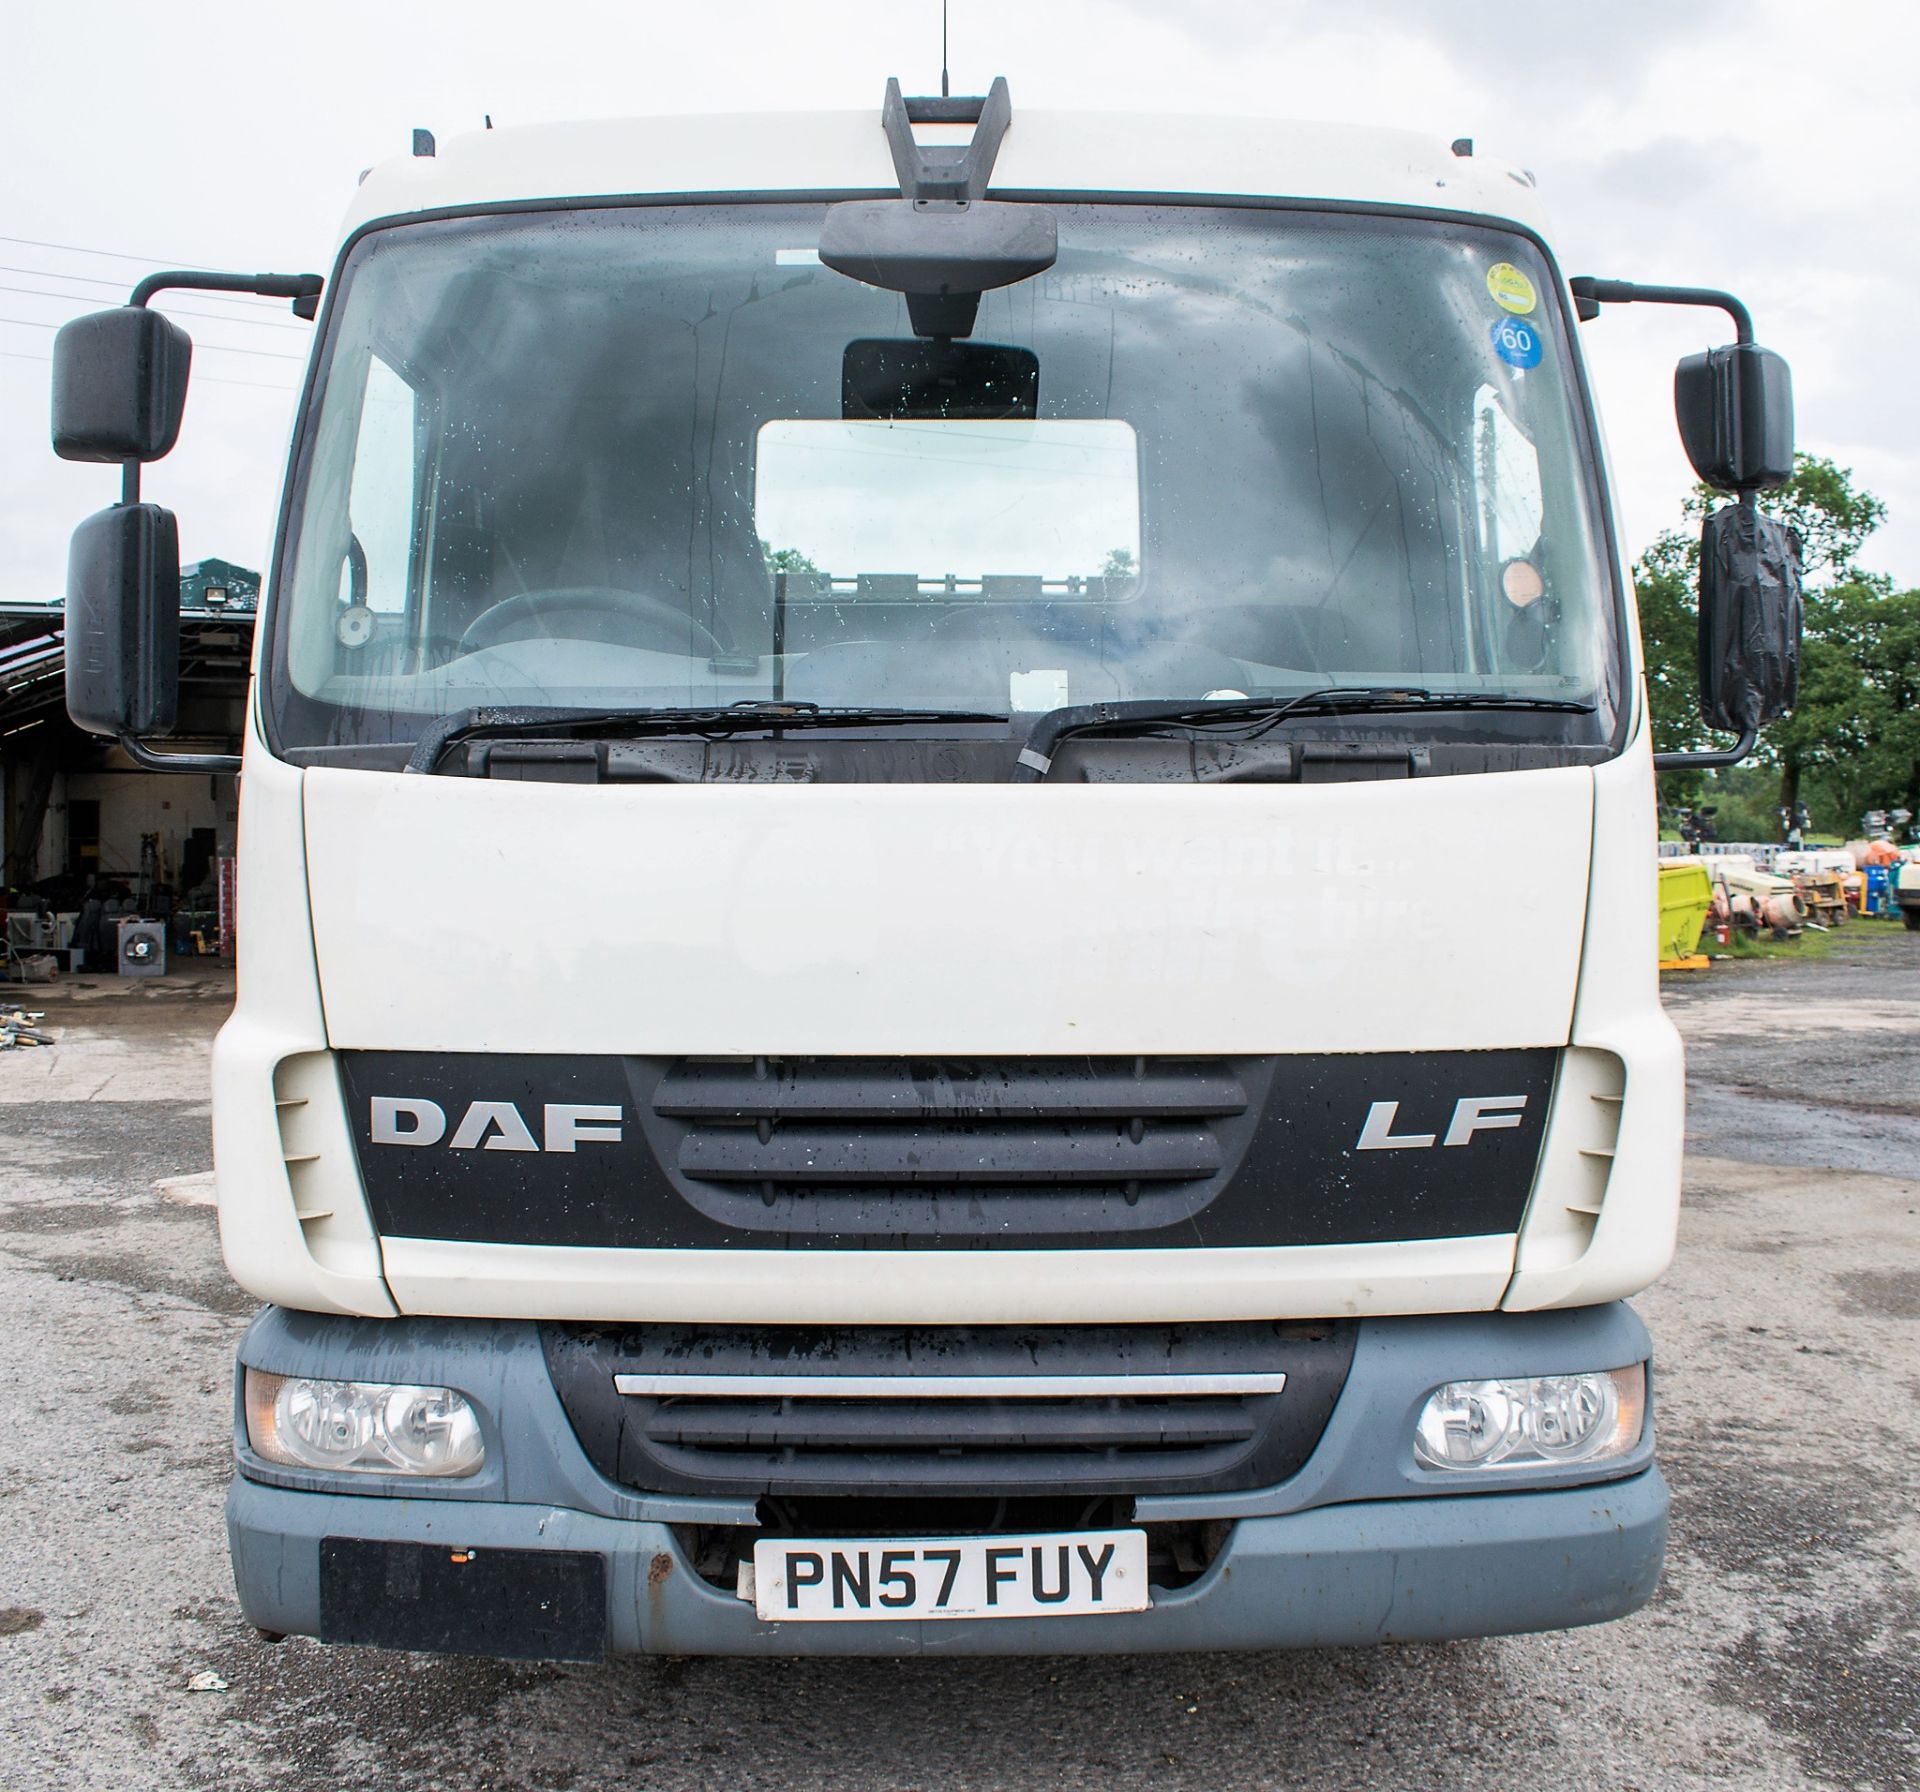 DAF LF 45.160 7.5 tonne beaver tail plant lorry Registration Number: PN57 FUY Date of - Image 5 of 15